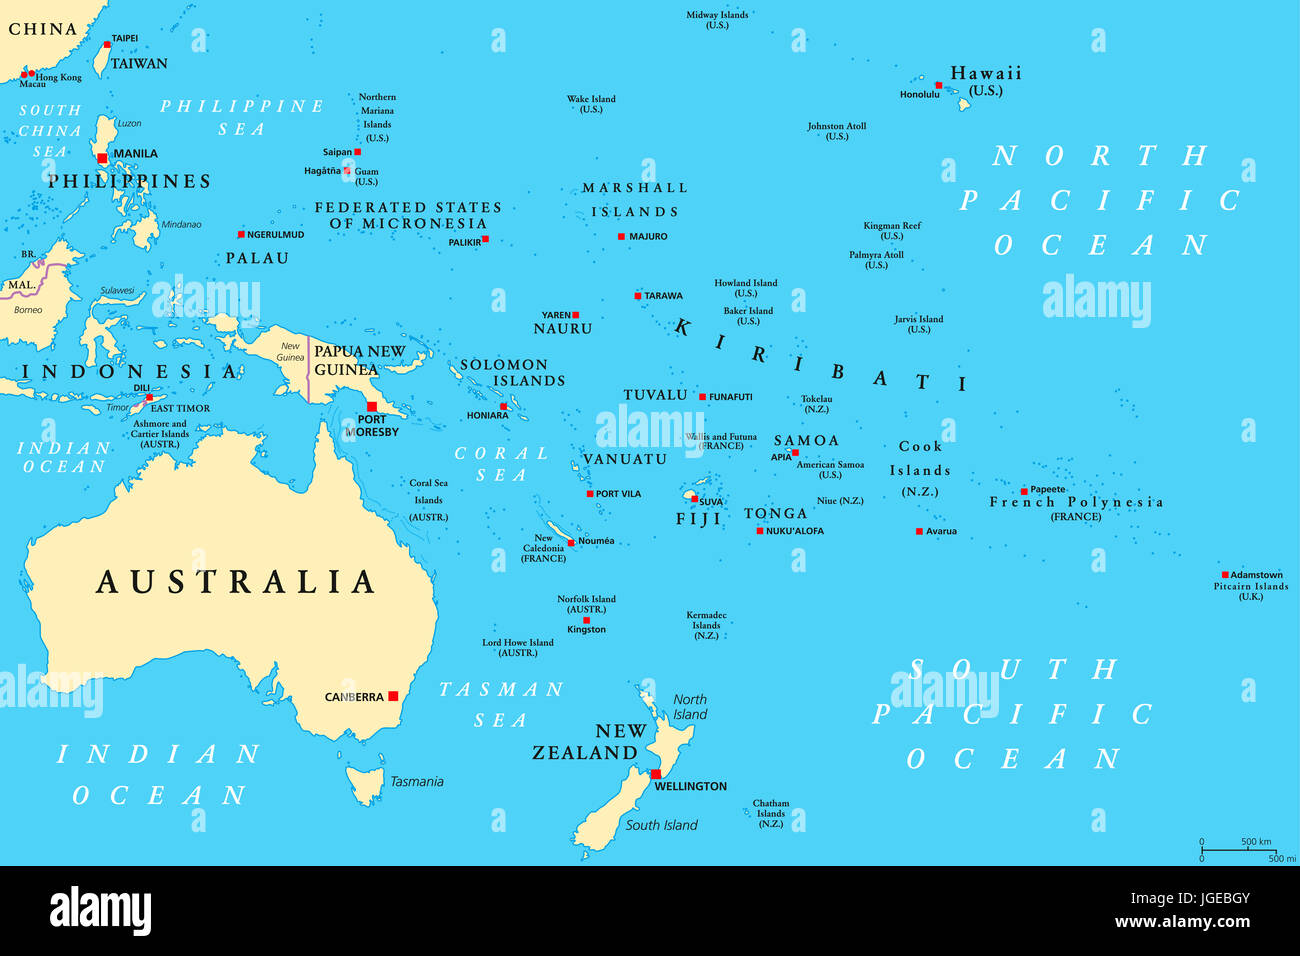 Oceania political map. Region, centered on central Pacific Ocean islands. With Melanesia, Micronesia and Polynesia, including Australasia. Stock Photo